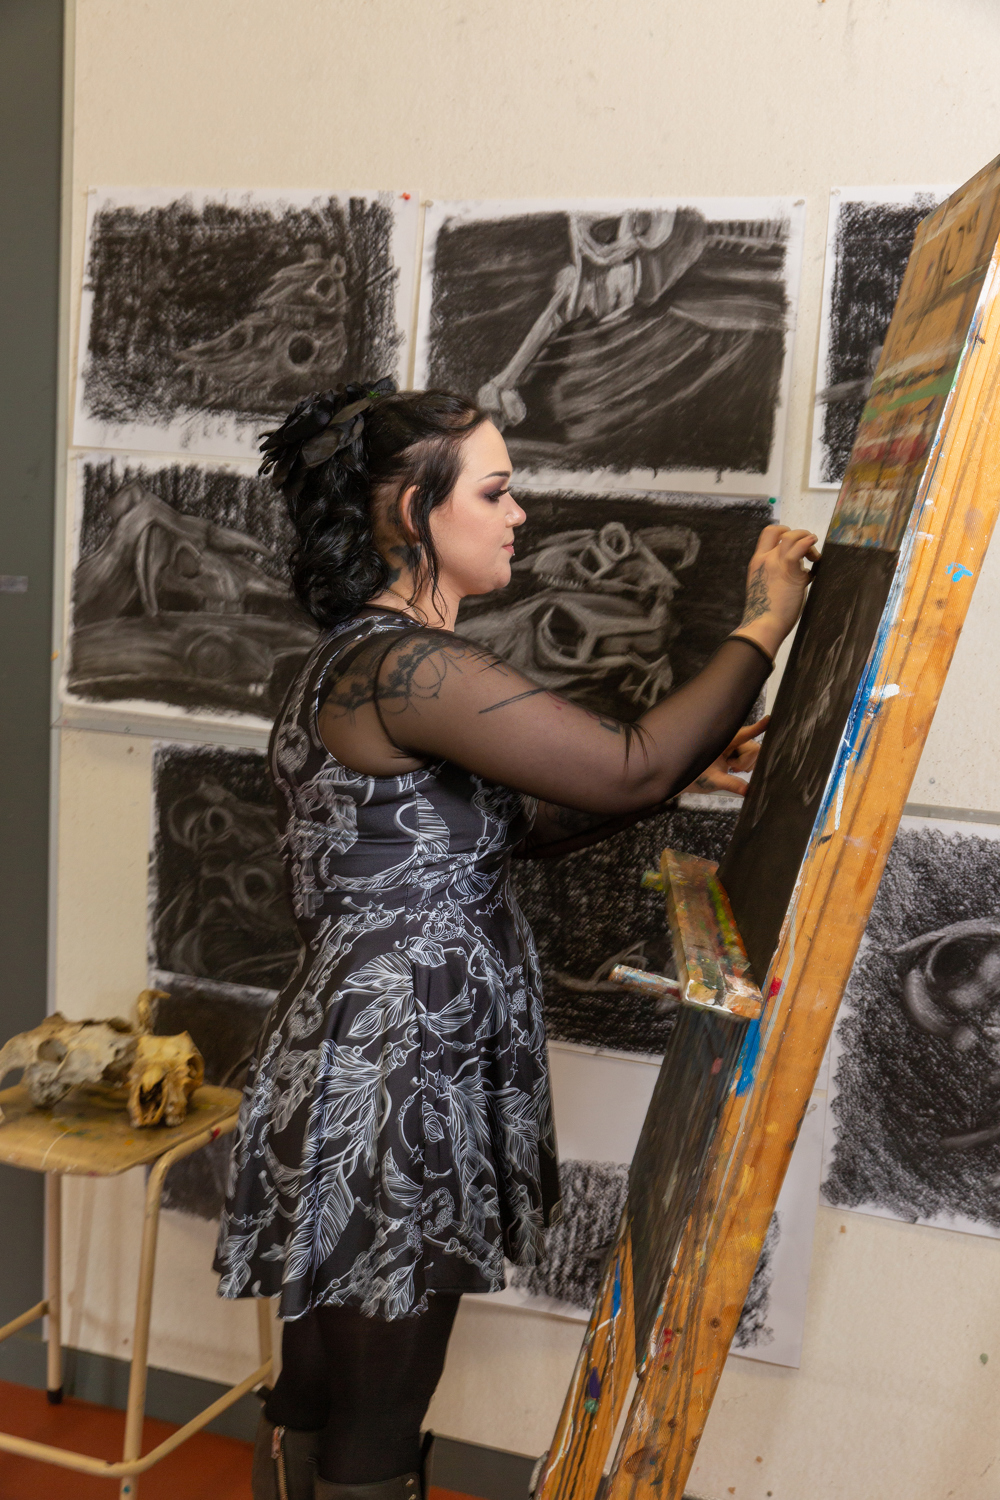 SWTAFE art student Katarena working on a charcoal piece